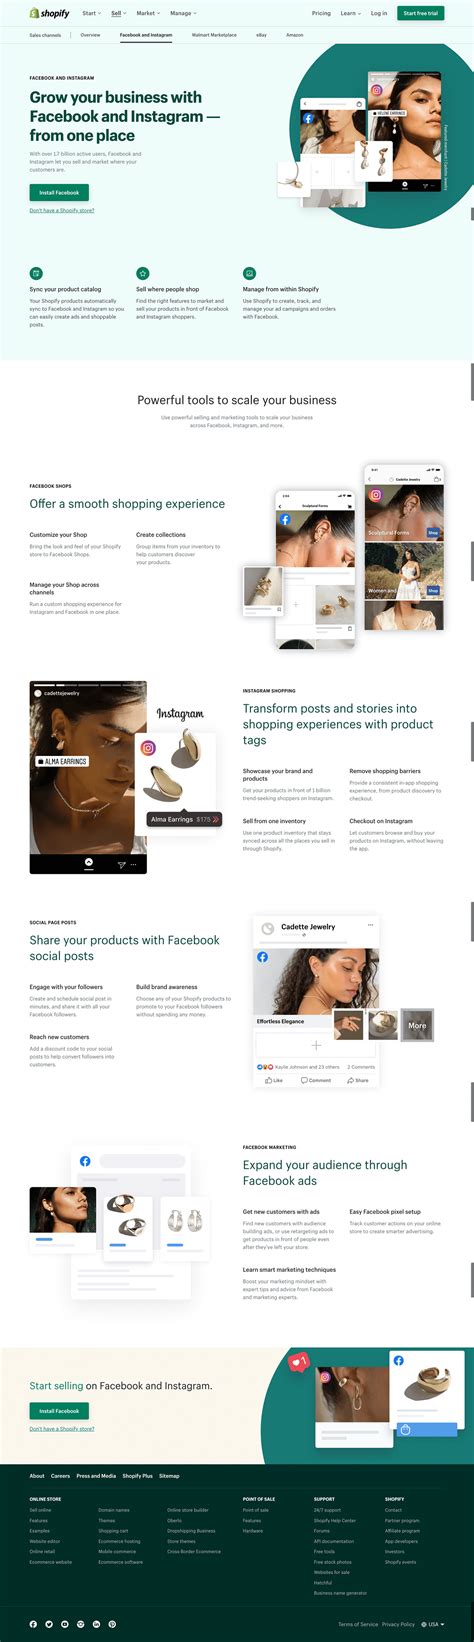 shopify bb integrations landing page convertflow